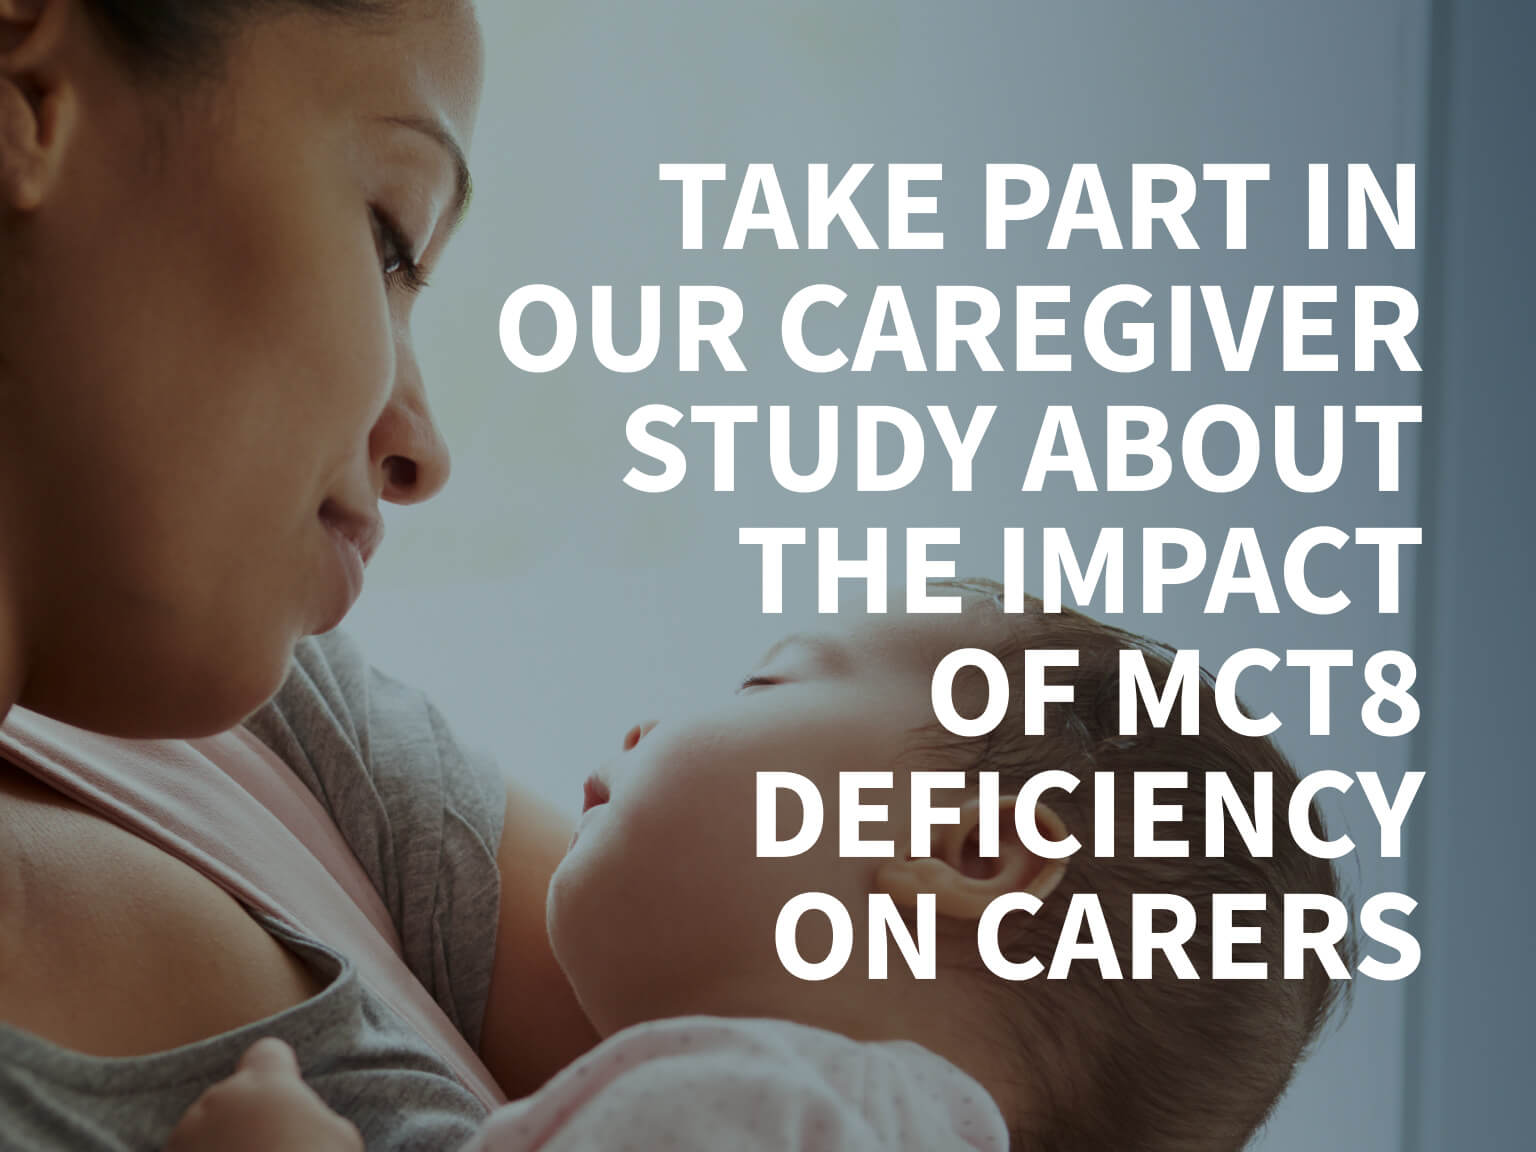 Take part in out caregiver study about the impact of mct8 deficiency on carers